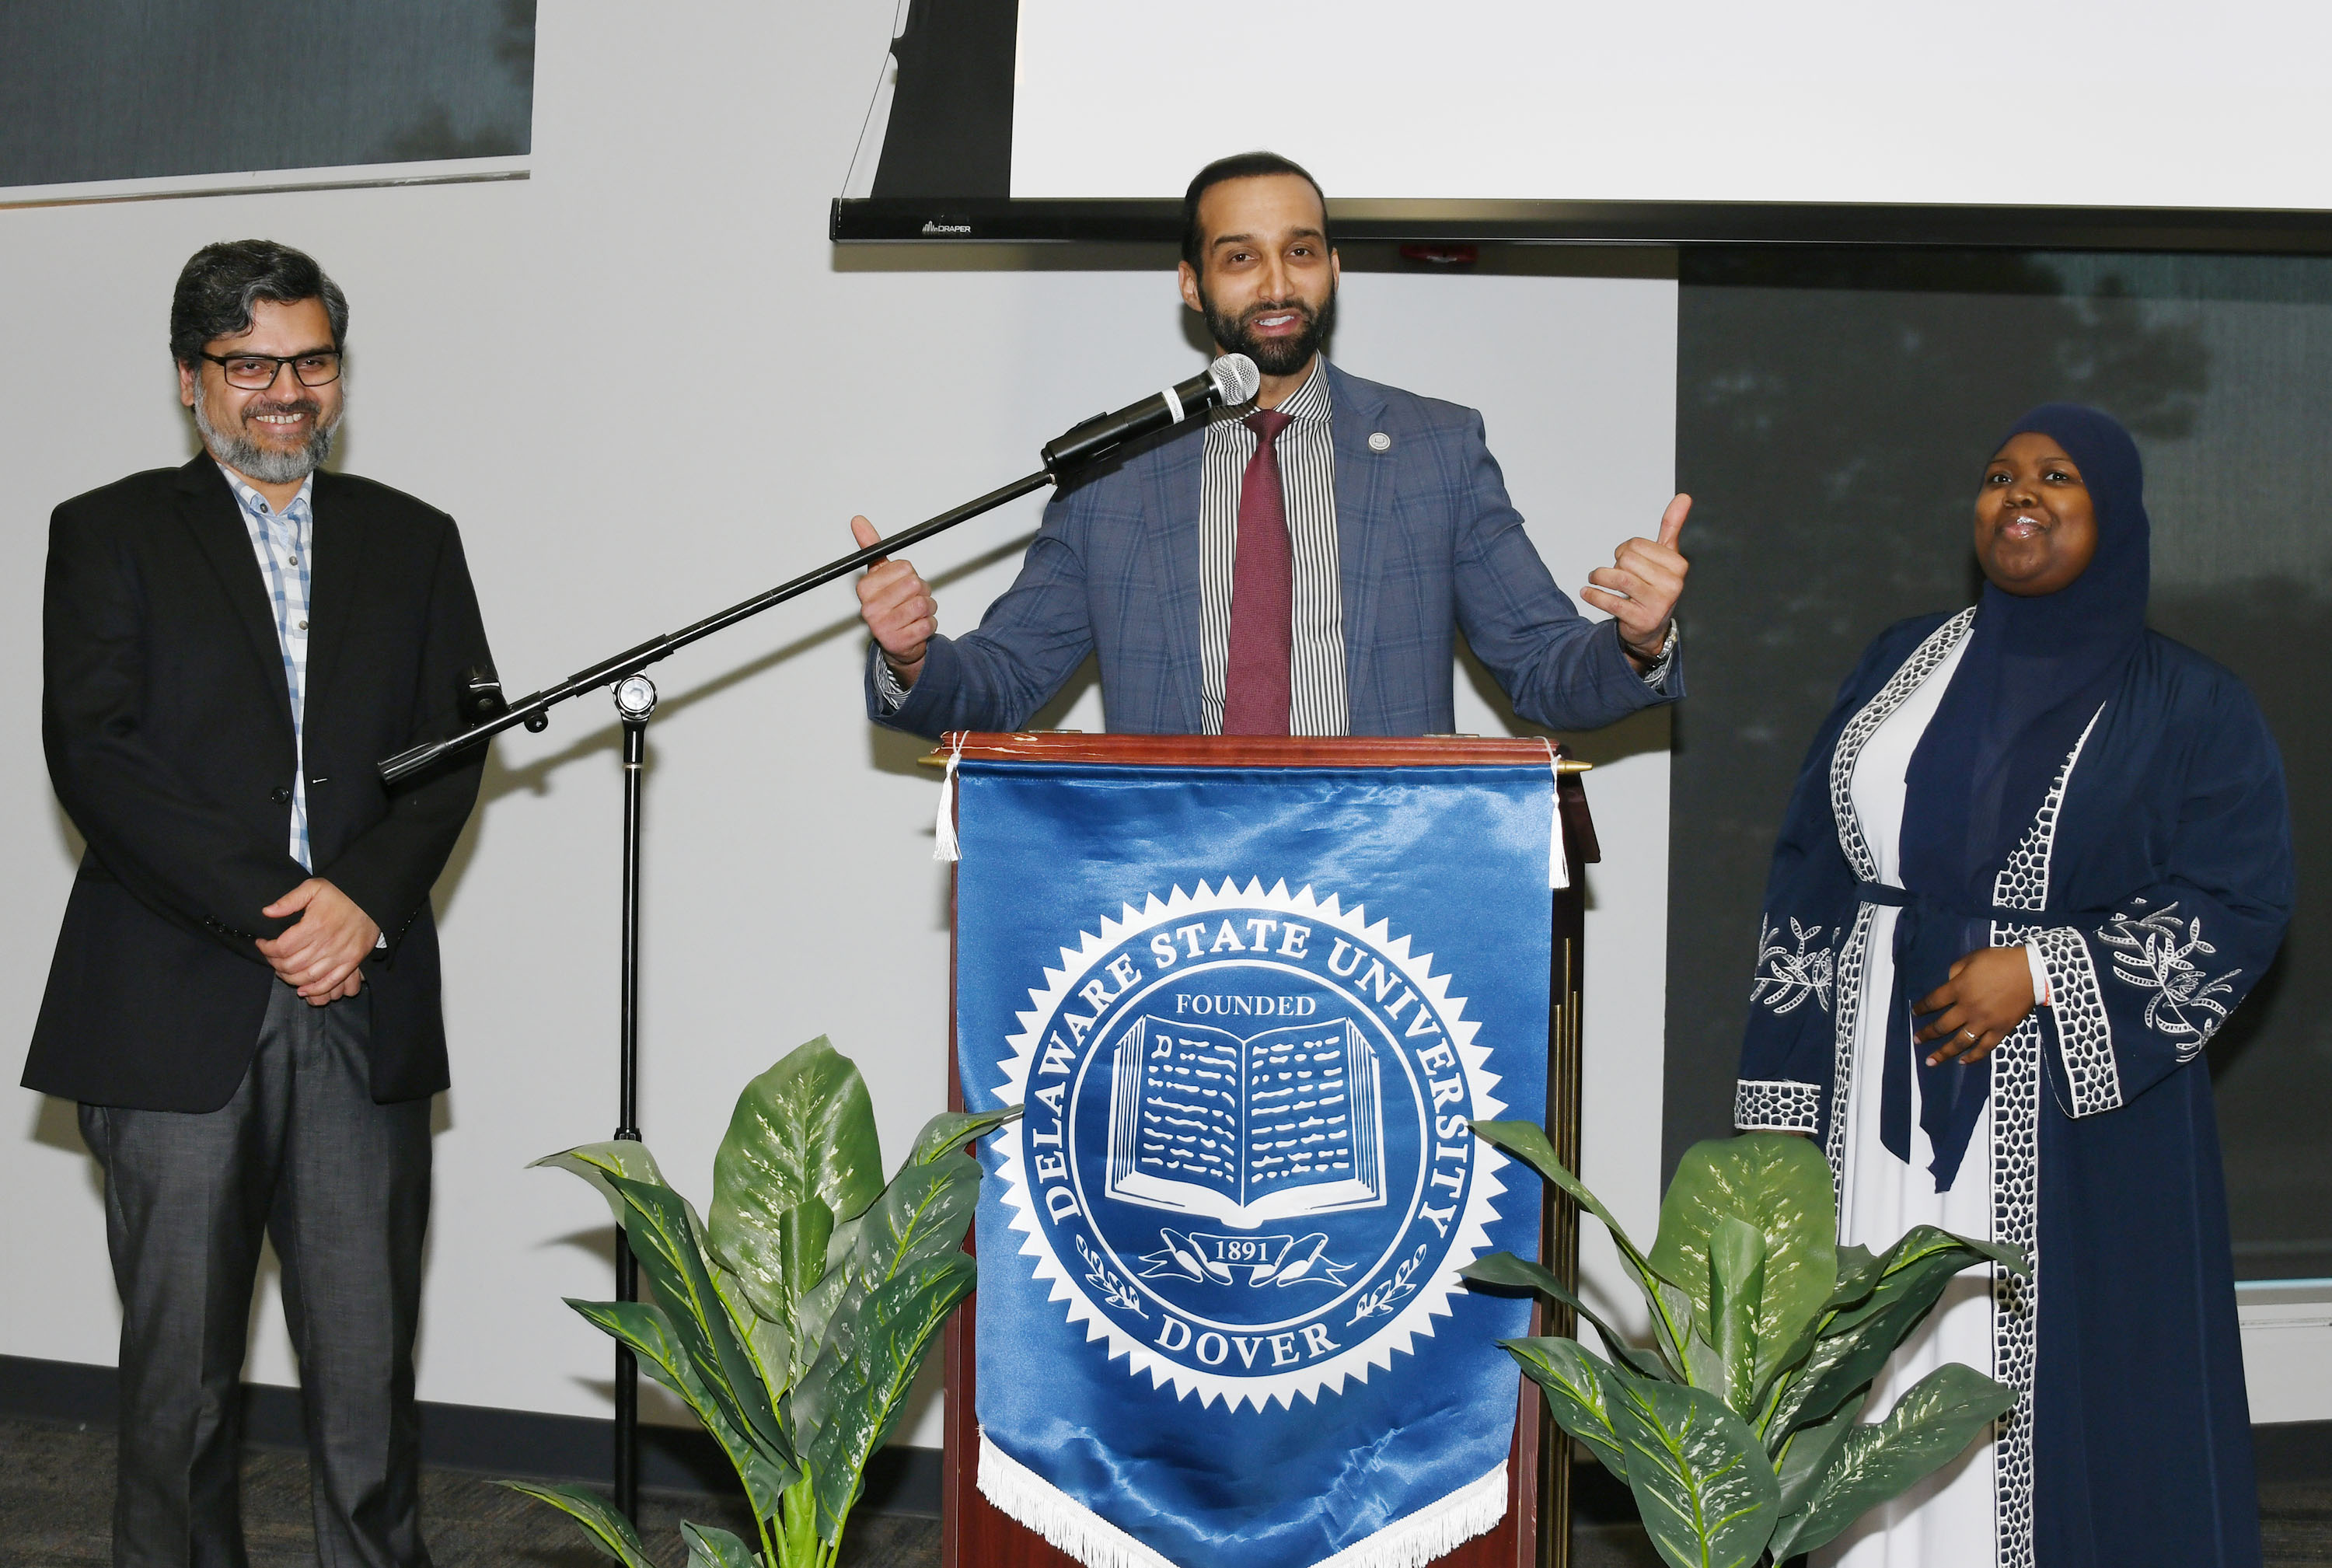 Anas Ben Addi speaks during the Ramadan celebration, flanked by Dr. Mohammed Khan and Tasiyah Sheppard.